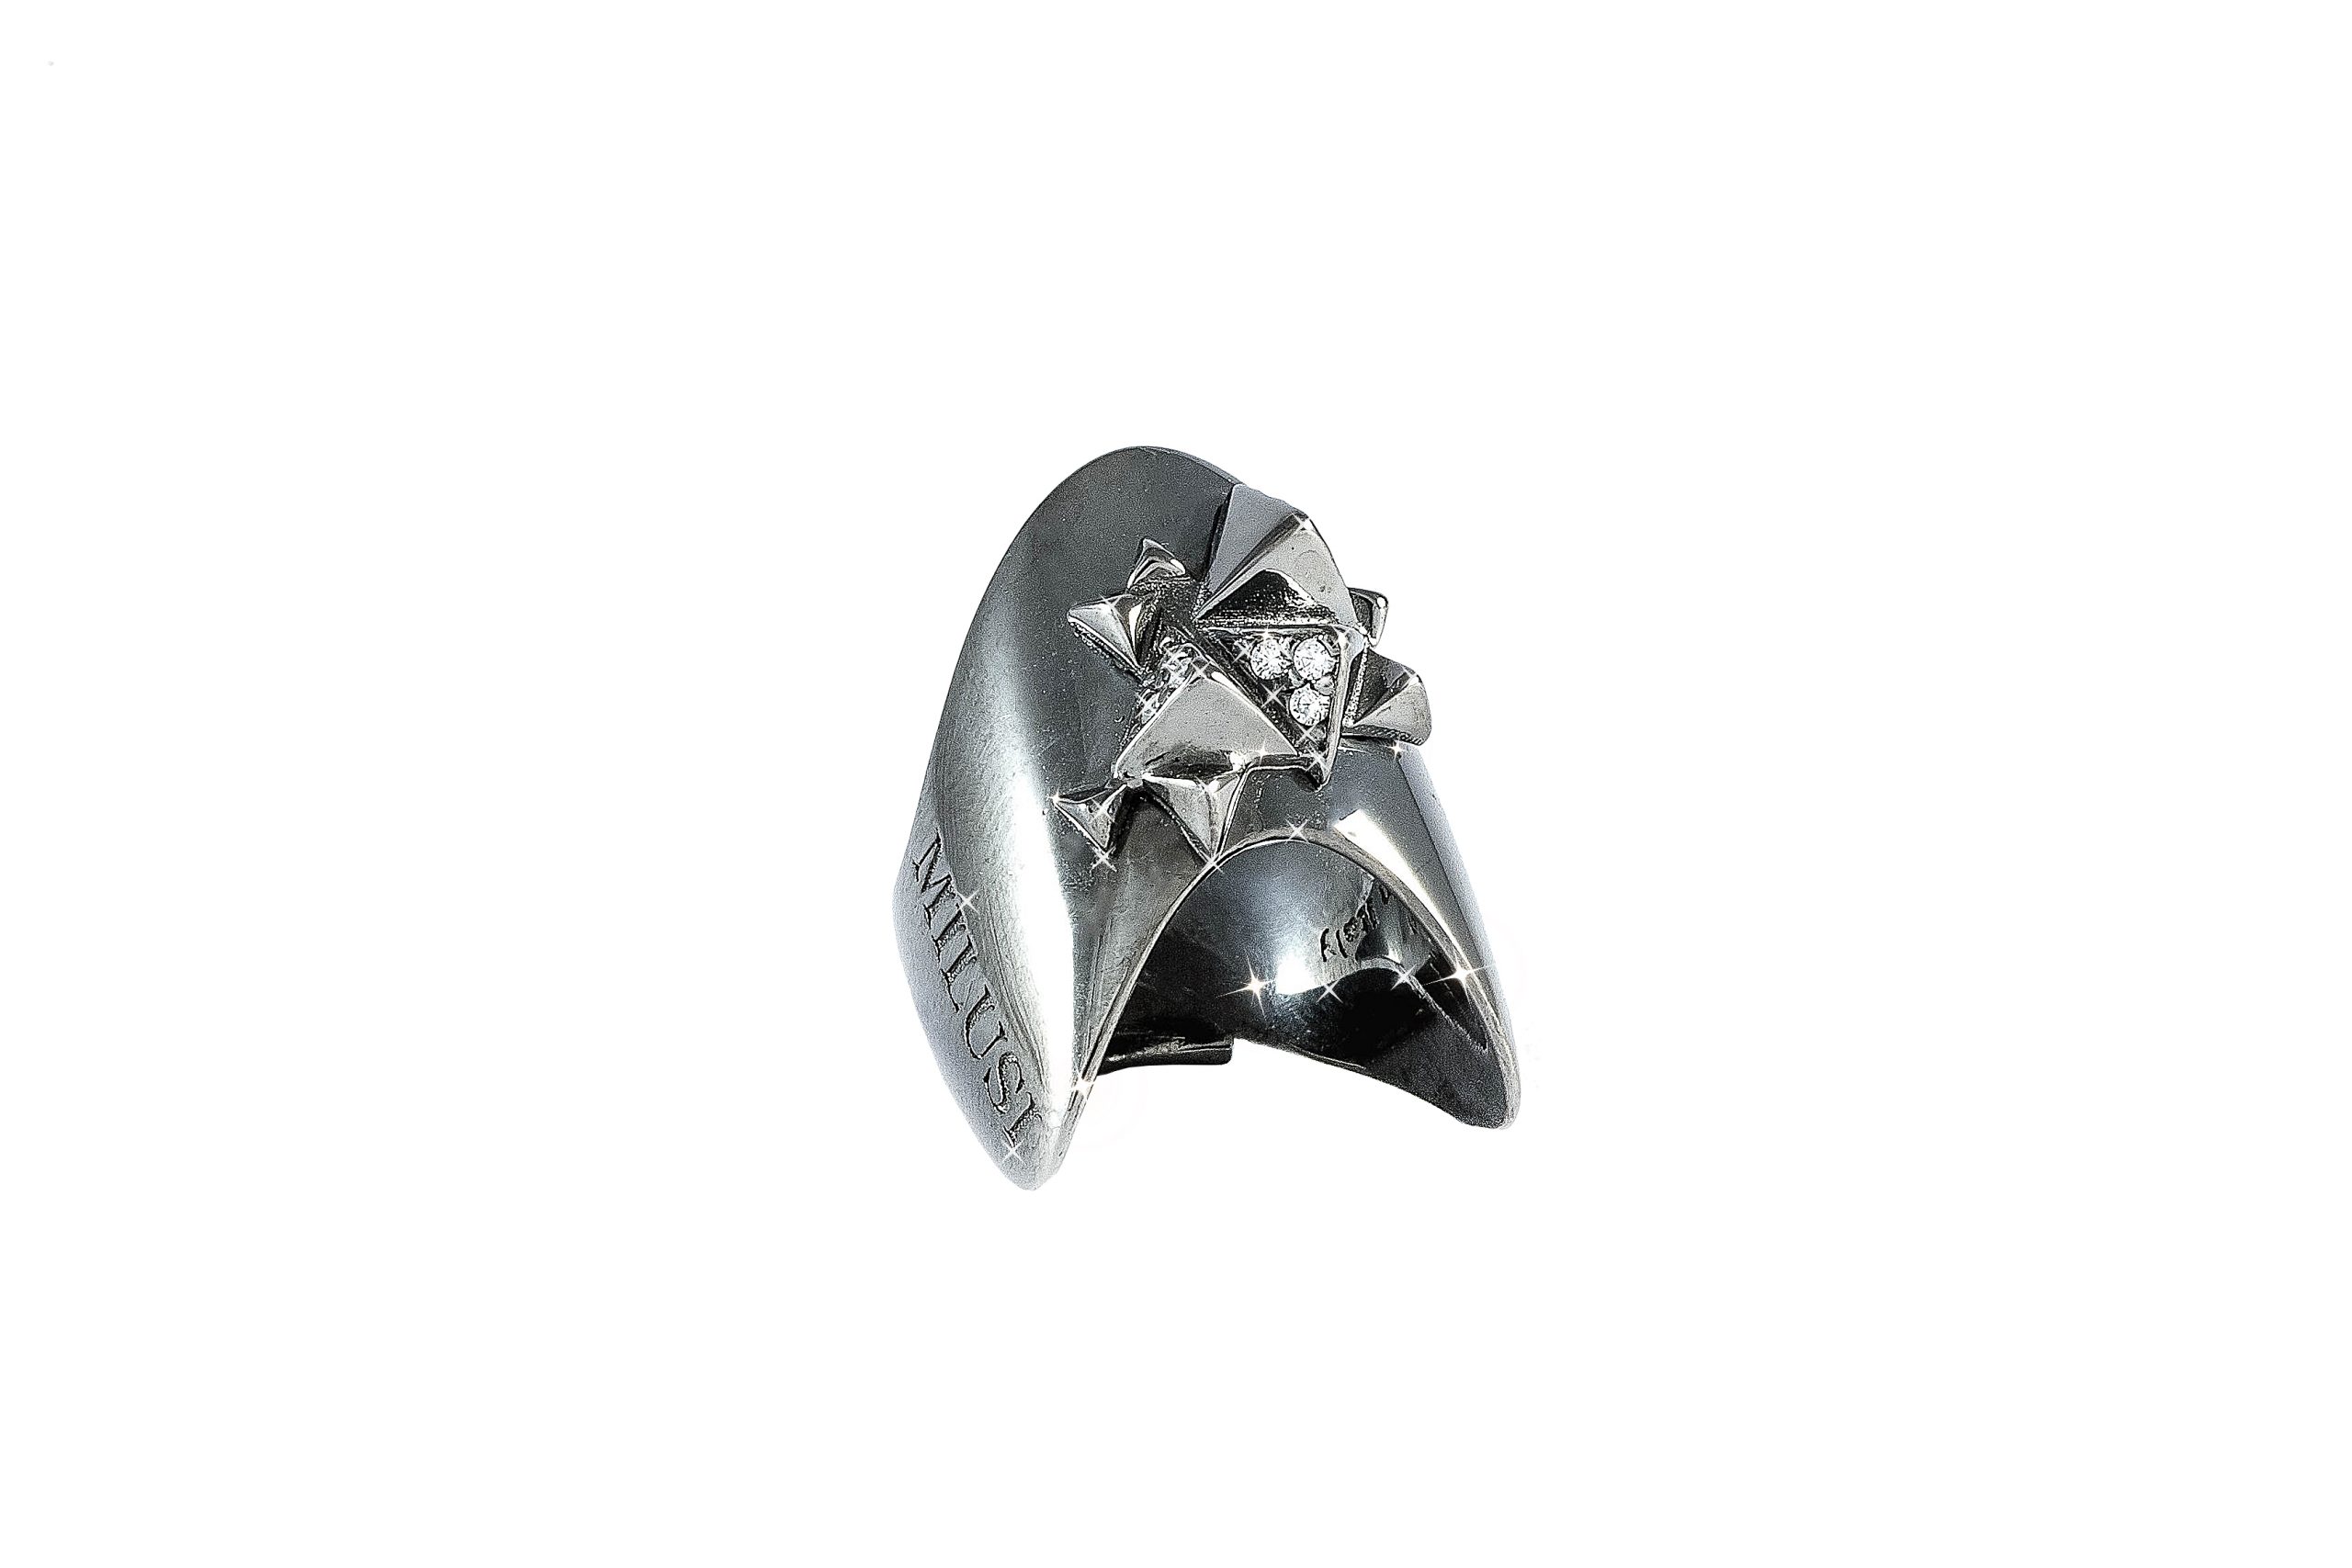 milusi-firenze nail rings firenze florence silver jewelry anelli argento copriunghia